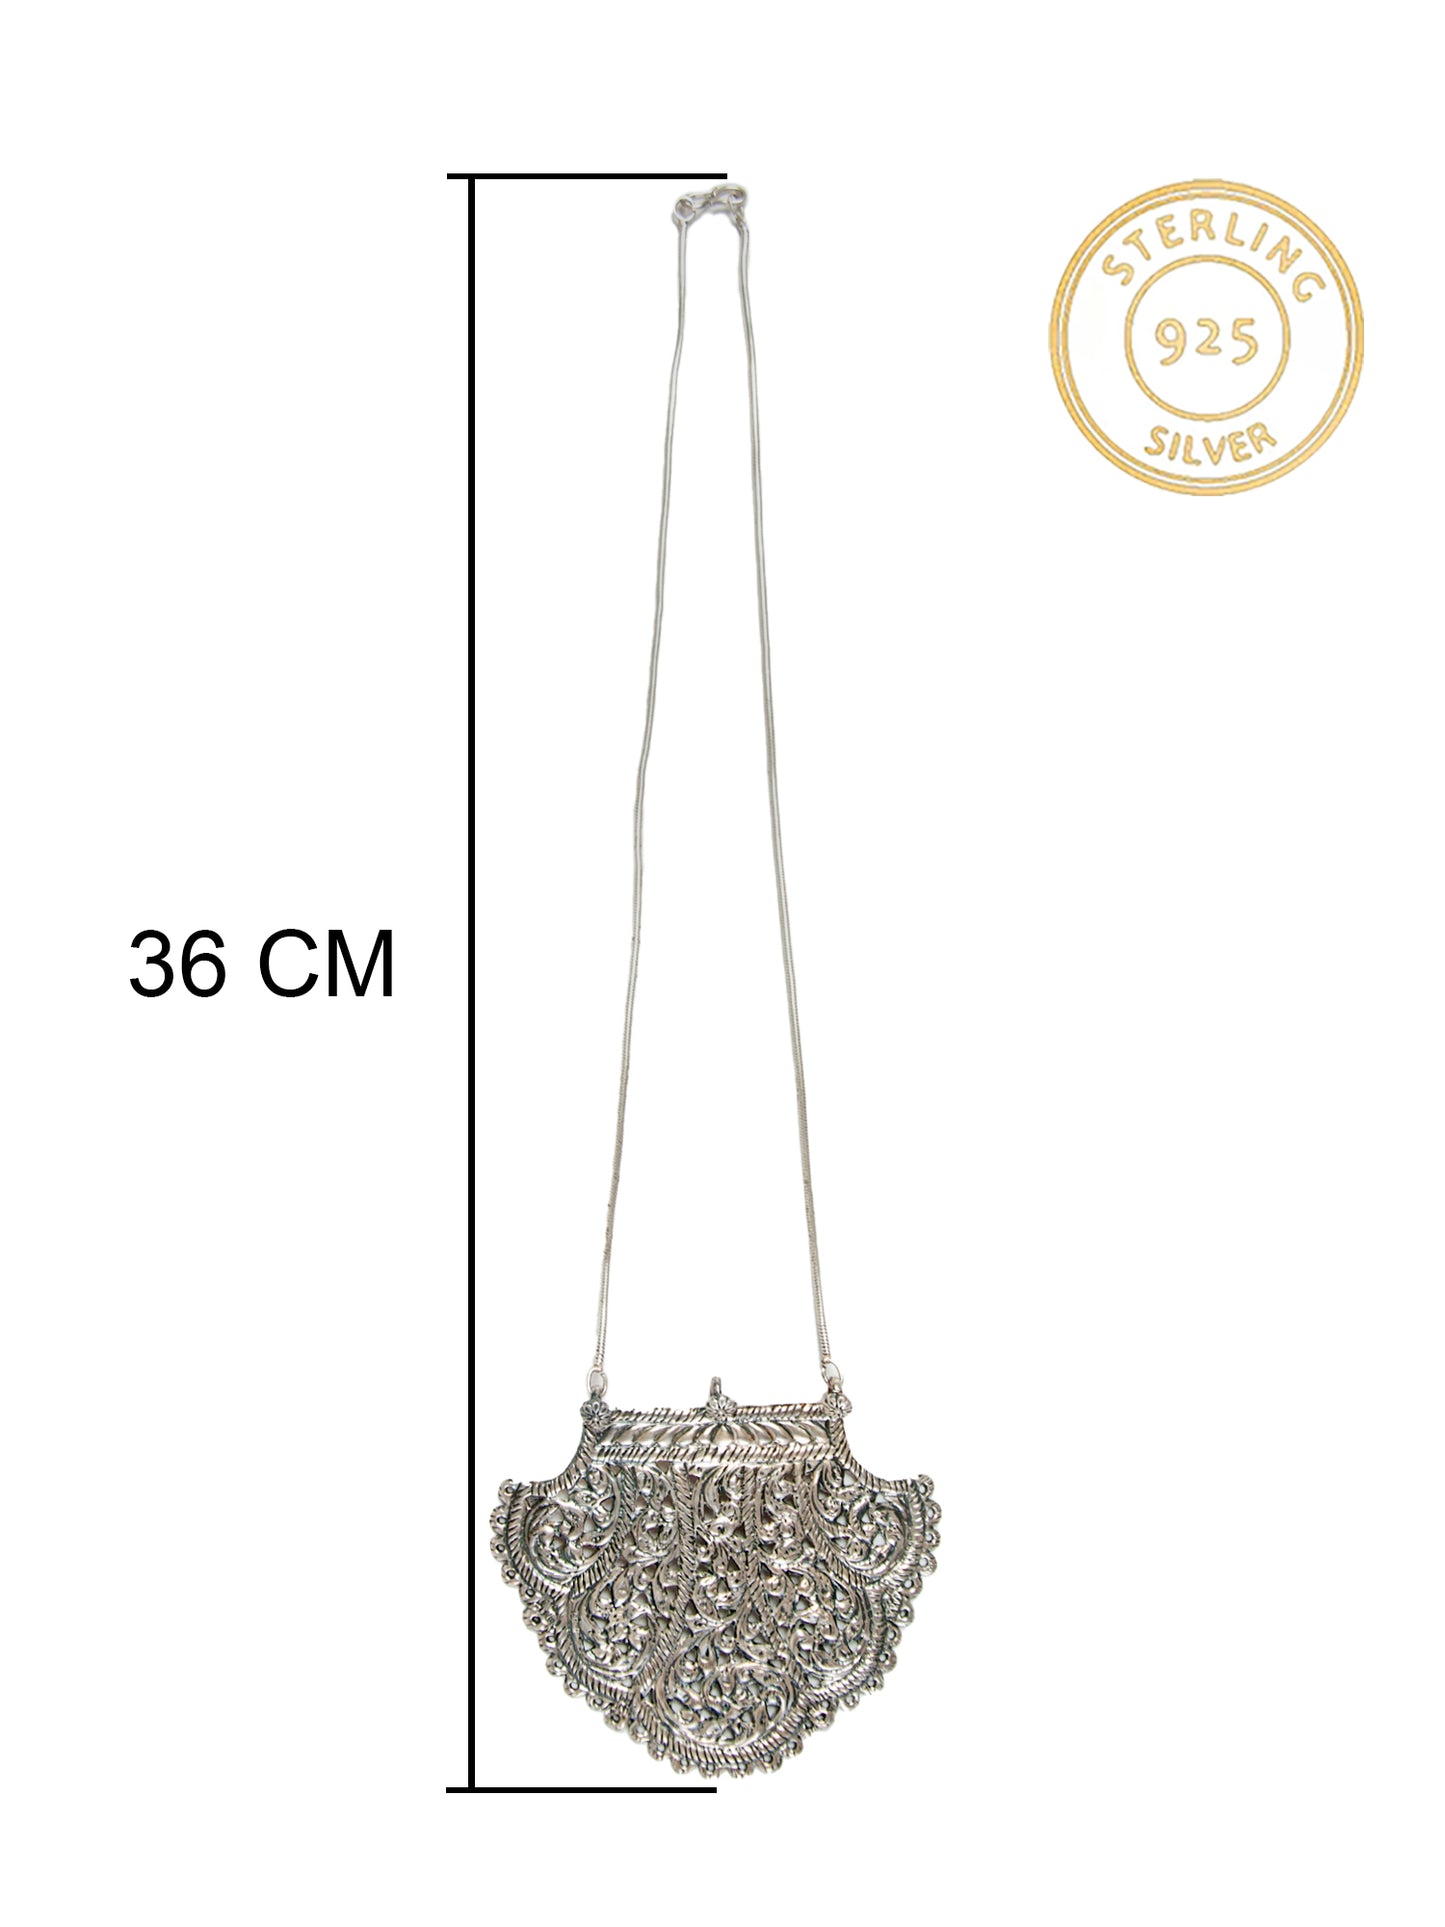 Chitai Charm: 925 Silver Hand-Embossed Everyday Wear Necklace